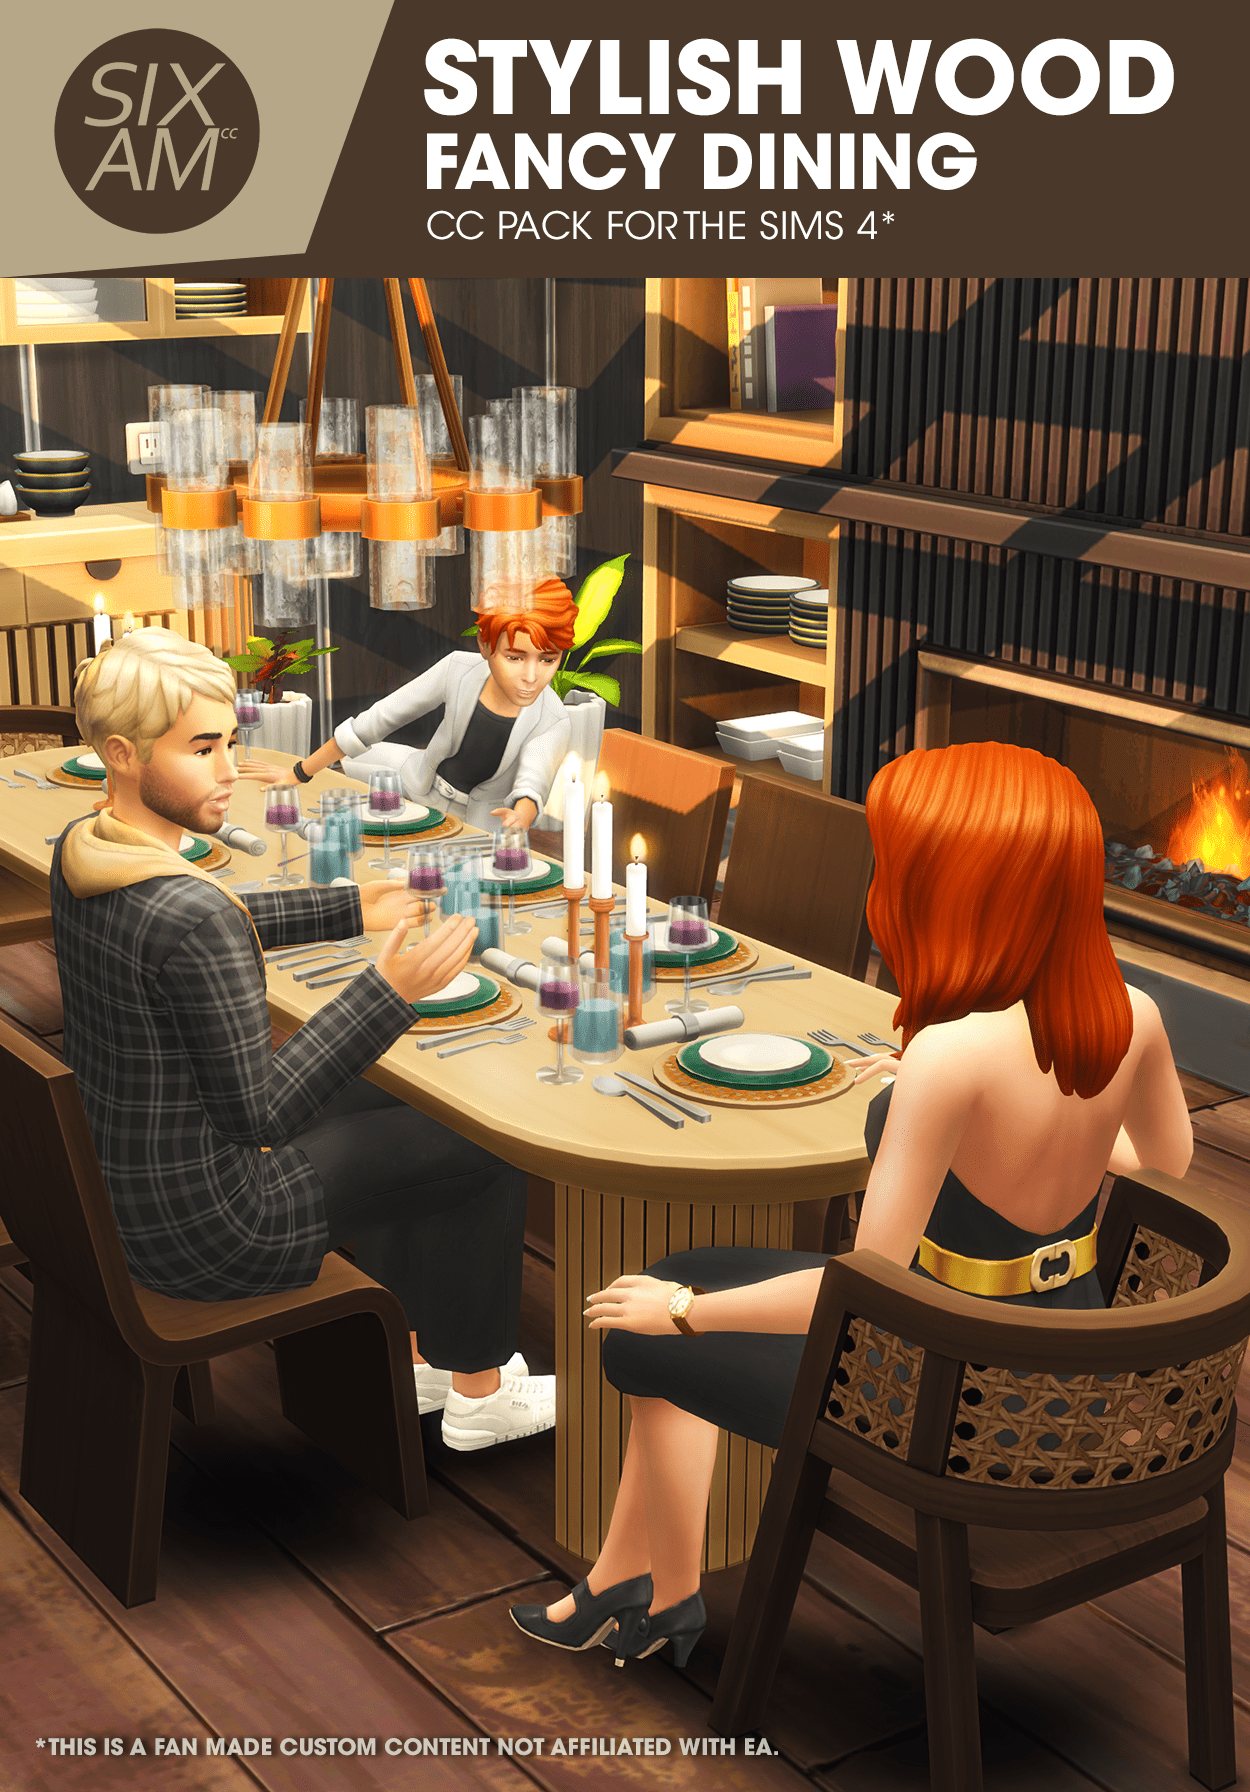 Stylish Wood – Fancy Dining (CC Pack for The Sims 4)